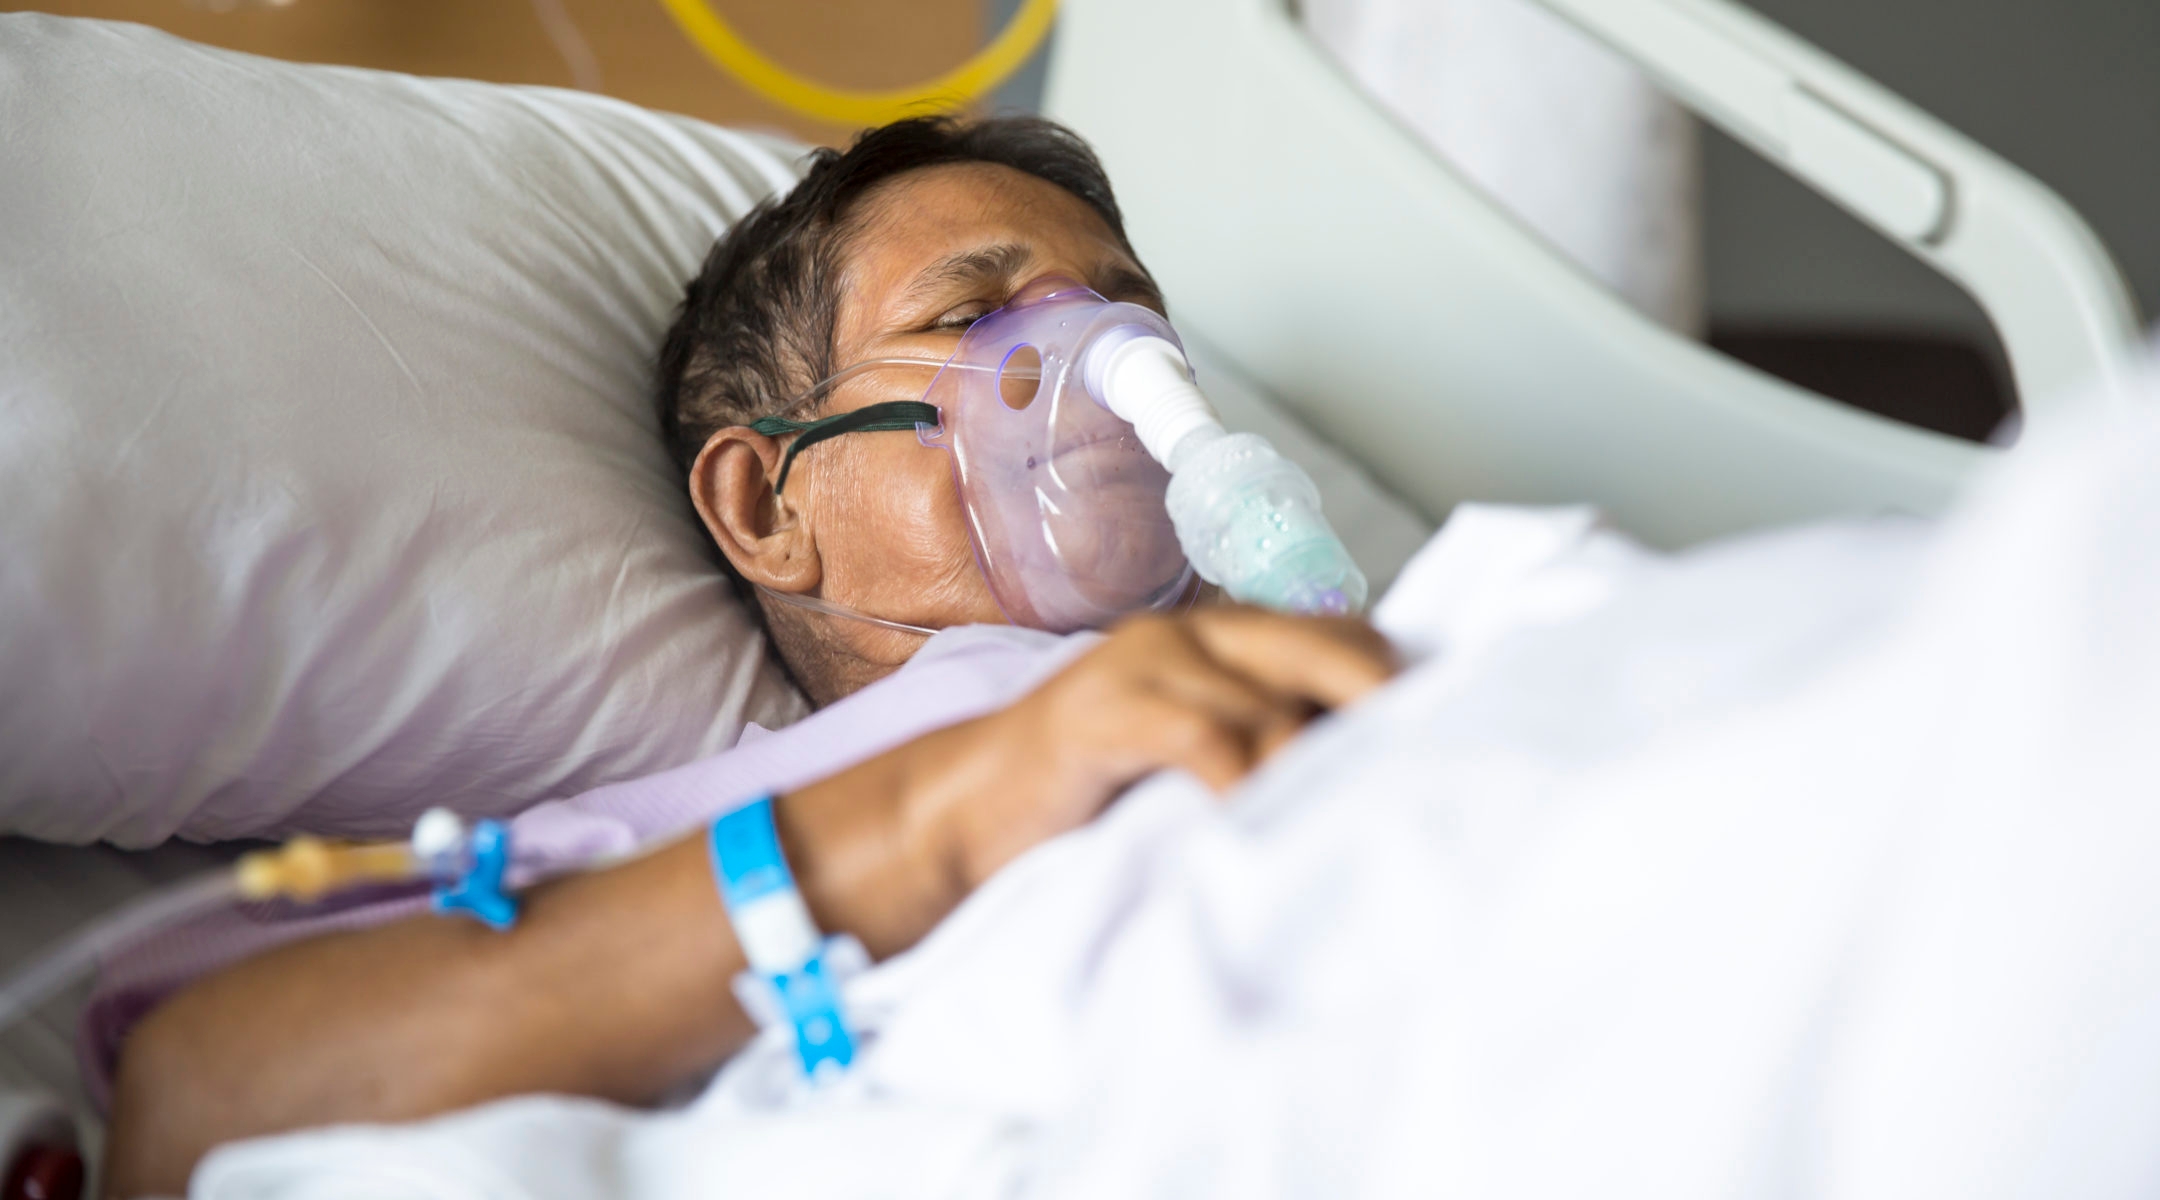 man in hospital bed with ventilator mask on